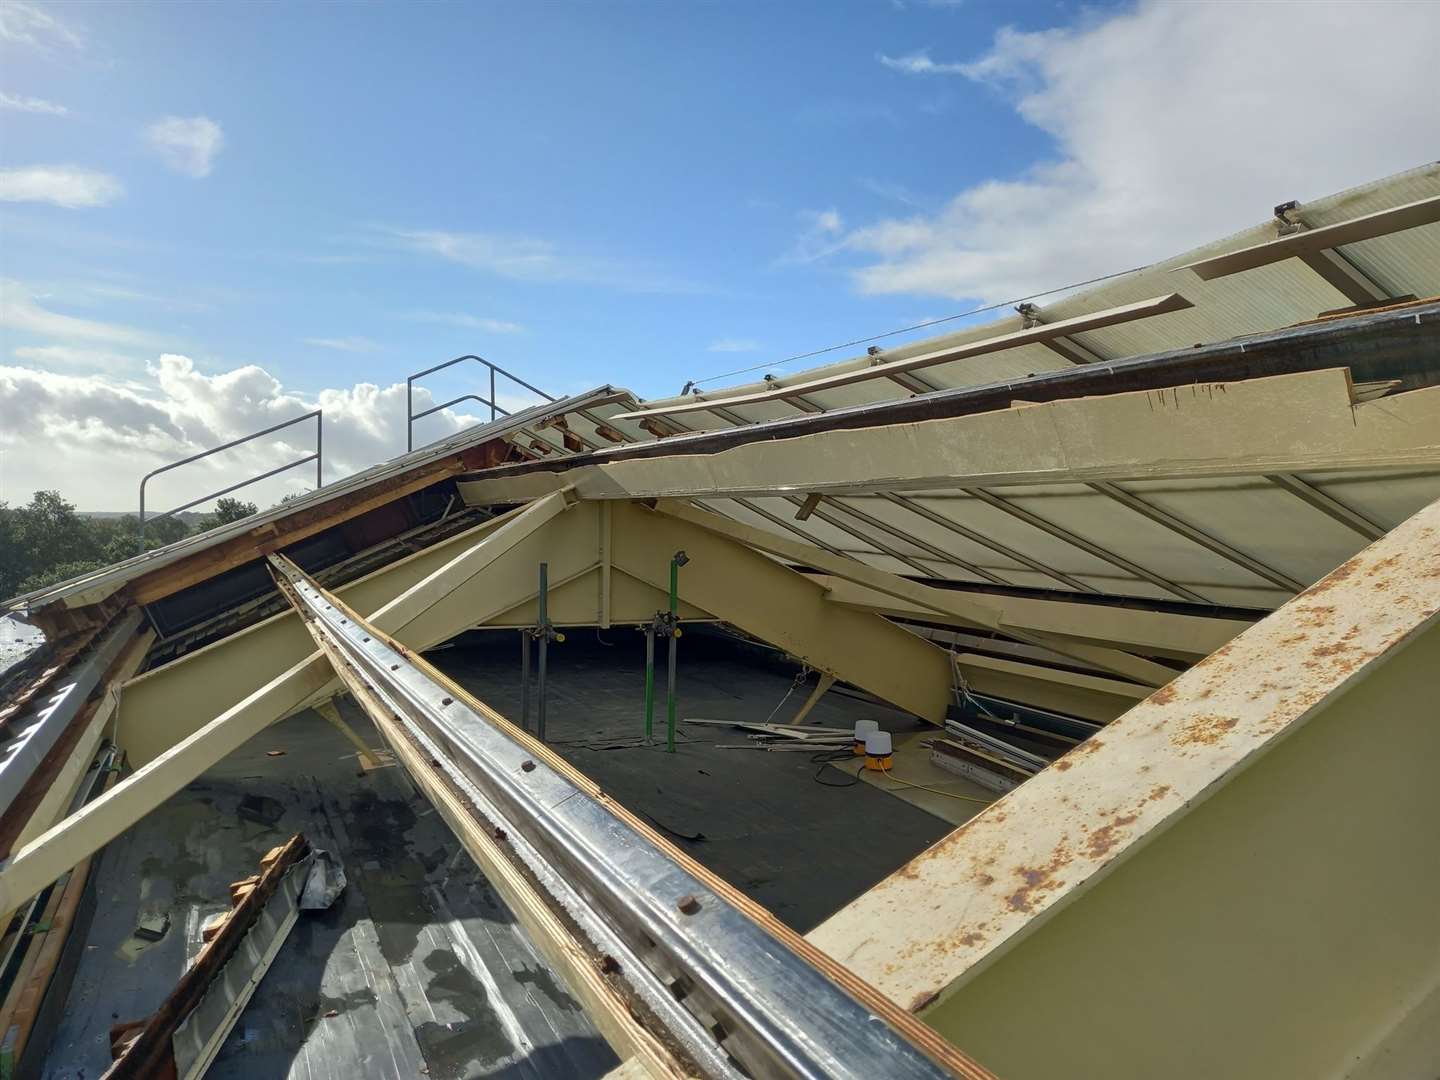 Panels have been removed from the roof to inspect damage. Photo: Ashford Borough Council